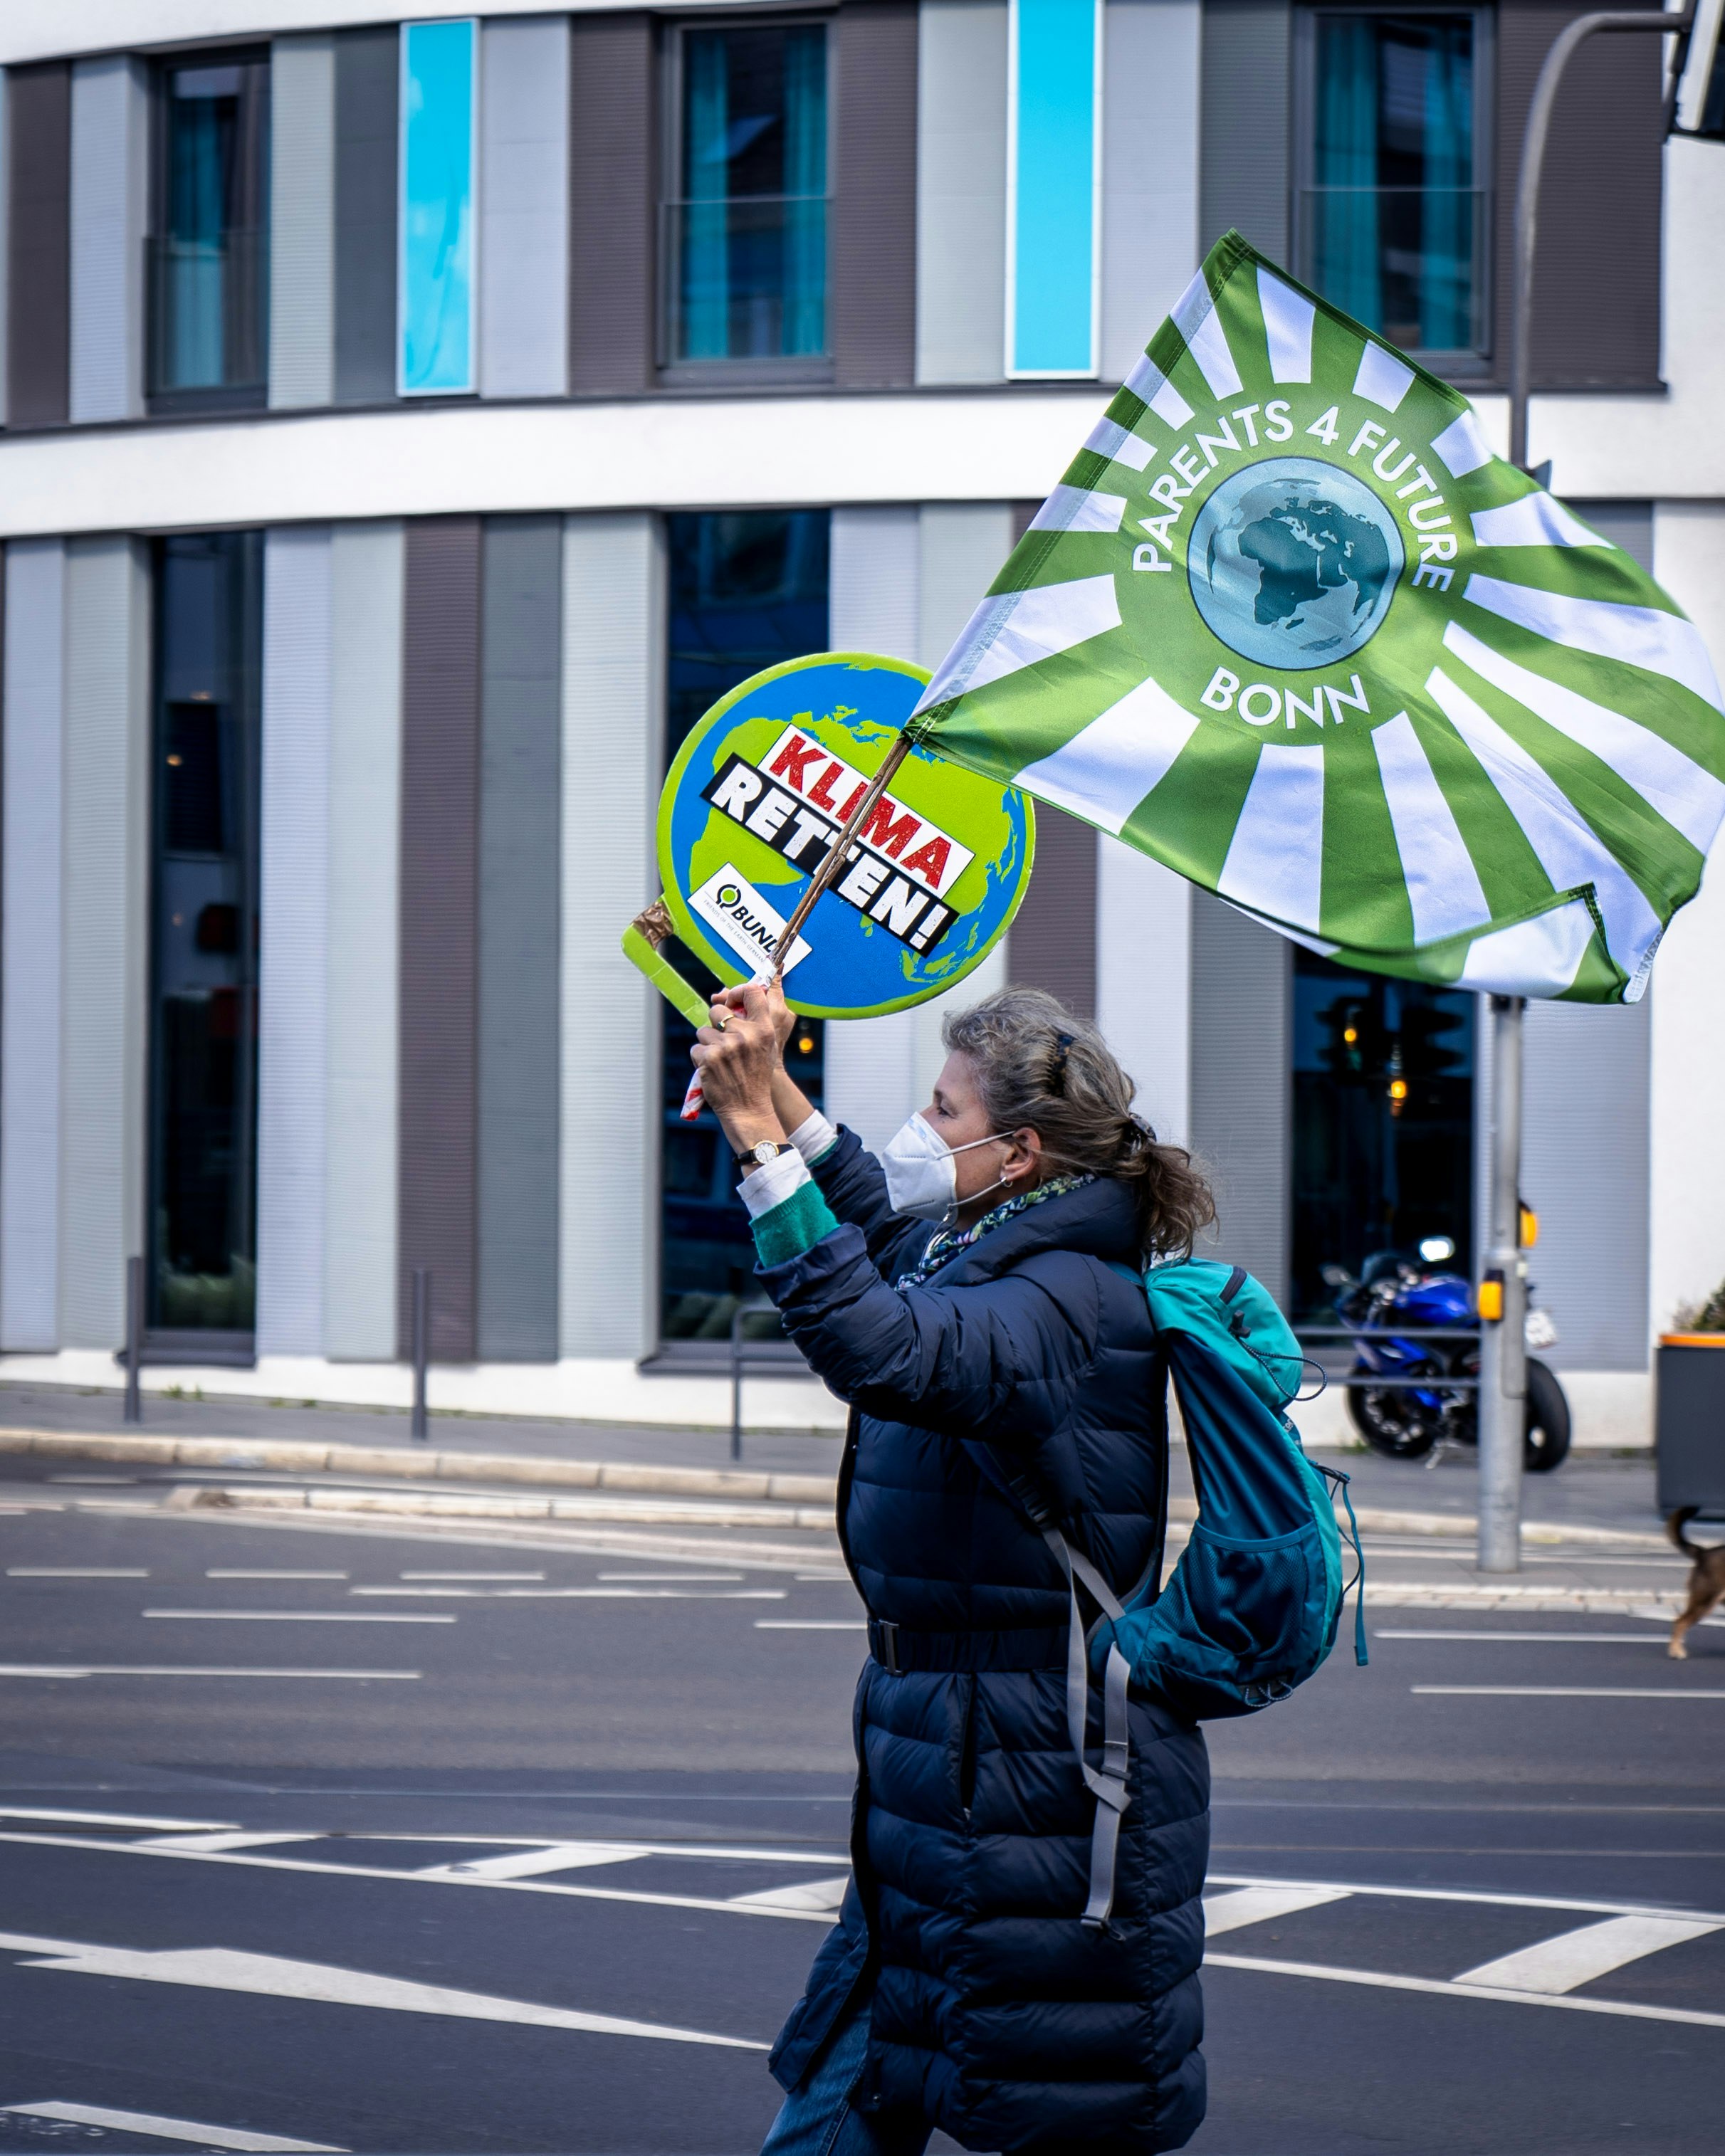 Parents for Future supporting Fridays for Future! 
- Fridays For Future Bonn, 2021-03-19